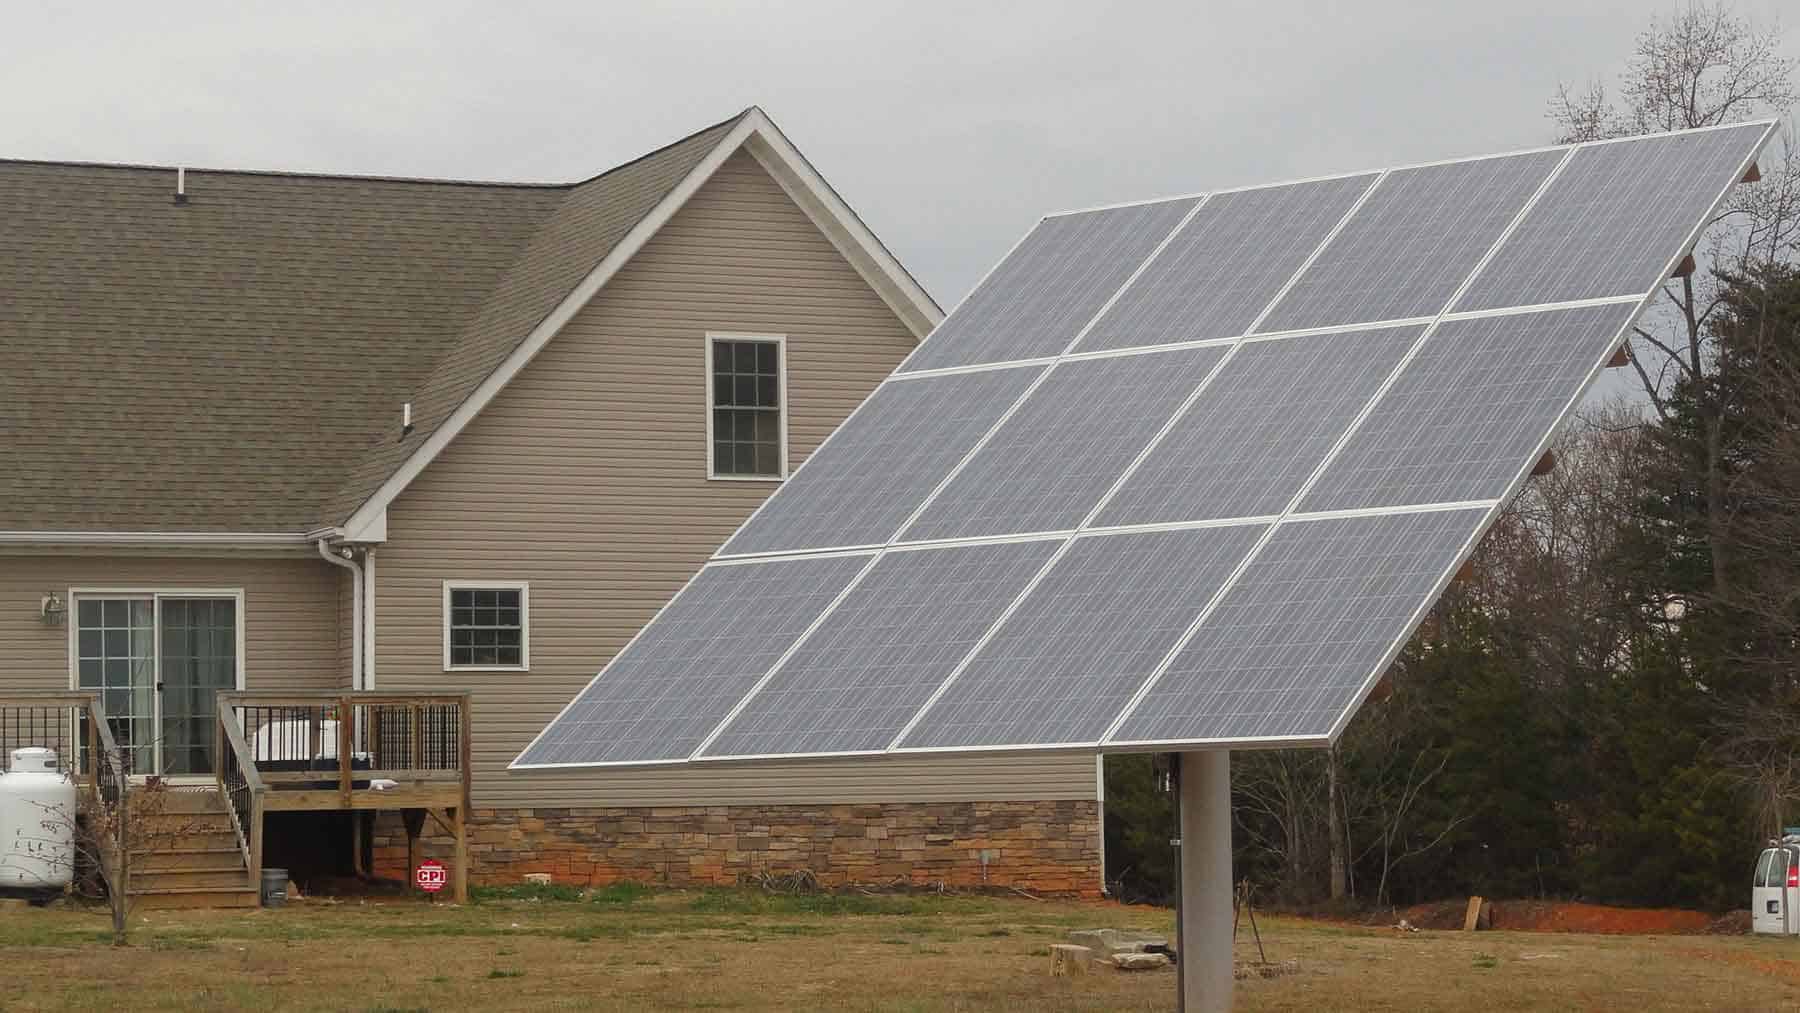 Considering getting solar panels? Here are the right questions to ask.